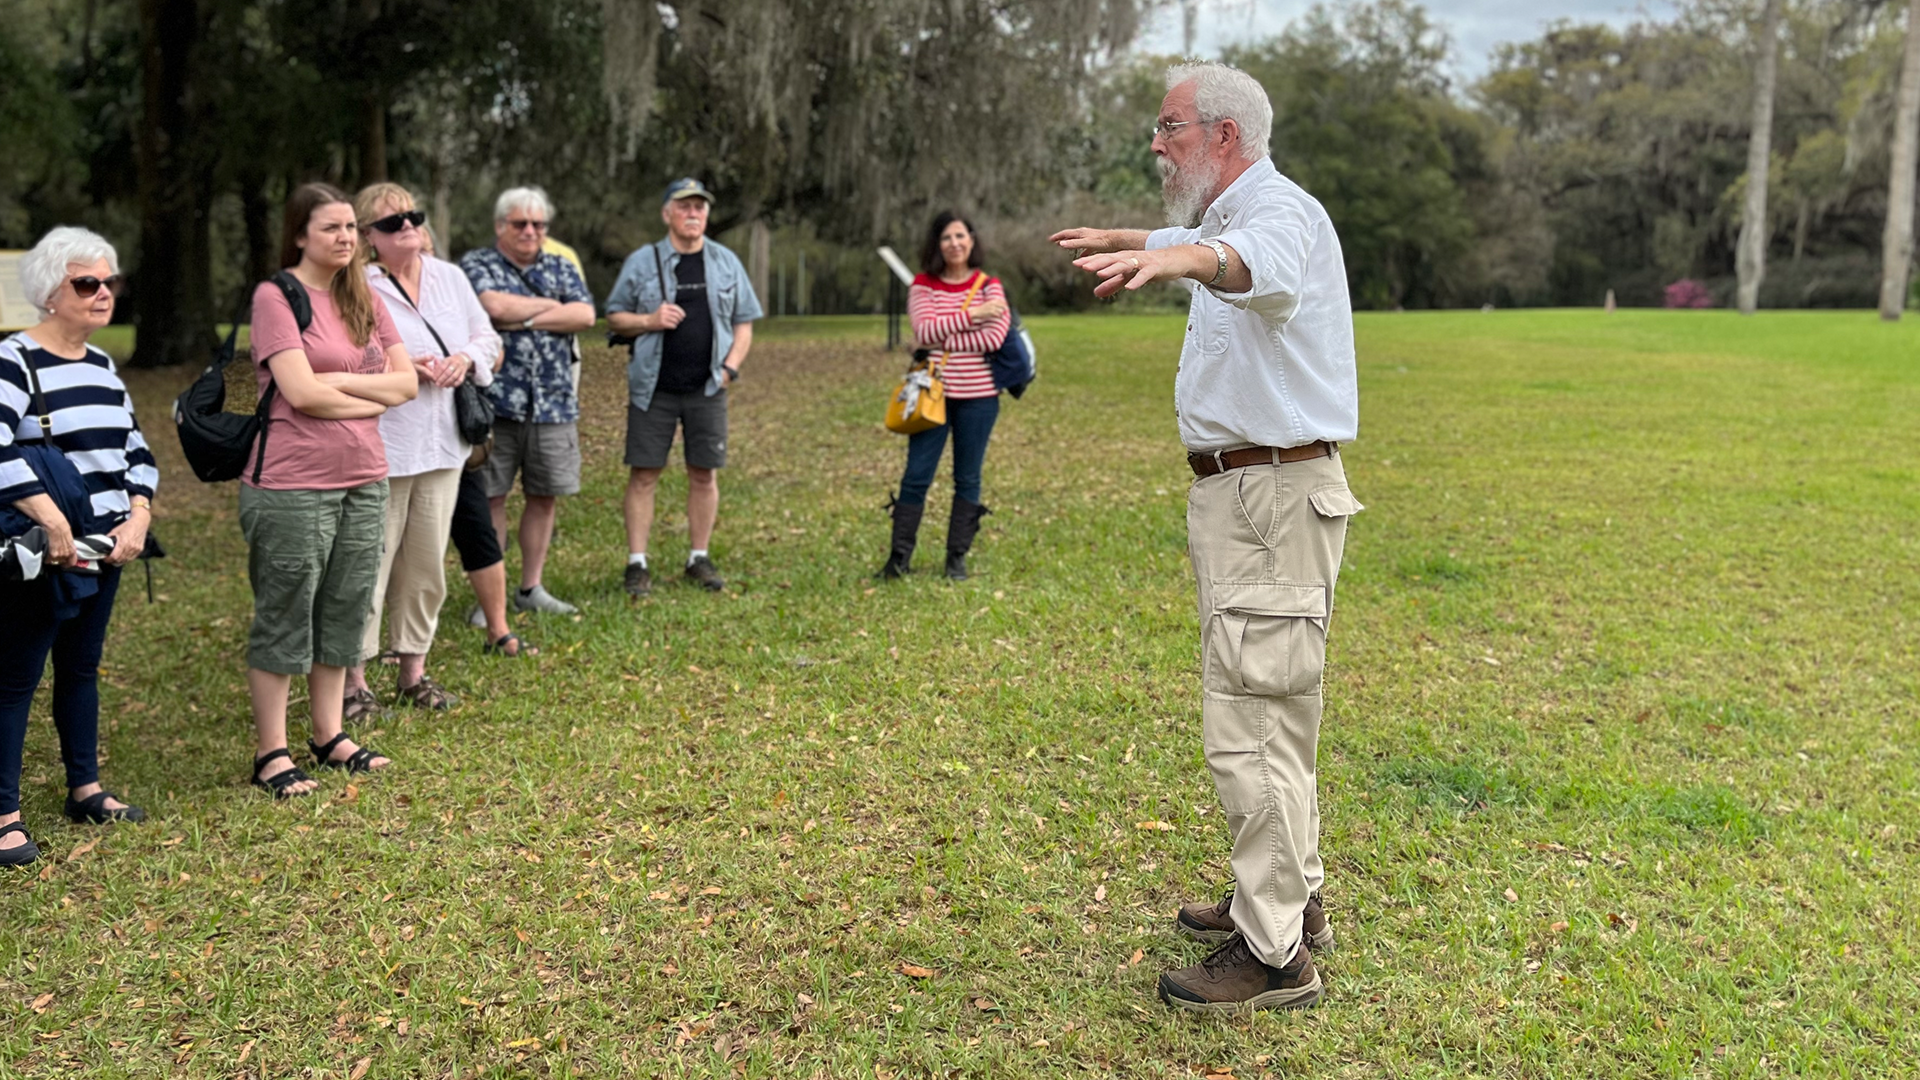 Gary Ellis, Director at Gulf Archaeology Research Institute, leads a talk at Chinsegut Hill Historic Site near Brooksville, Florida.